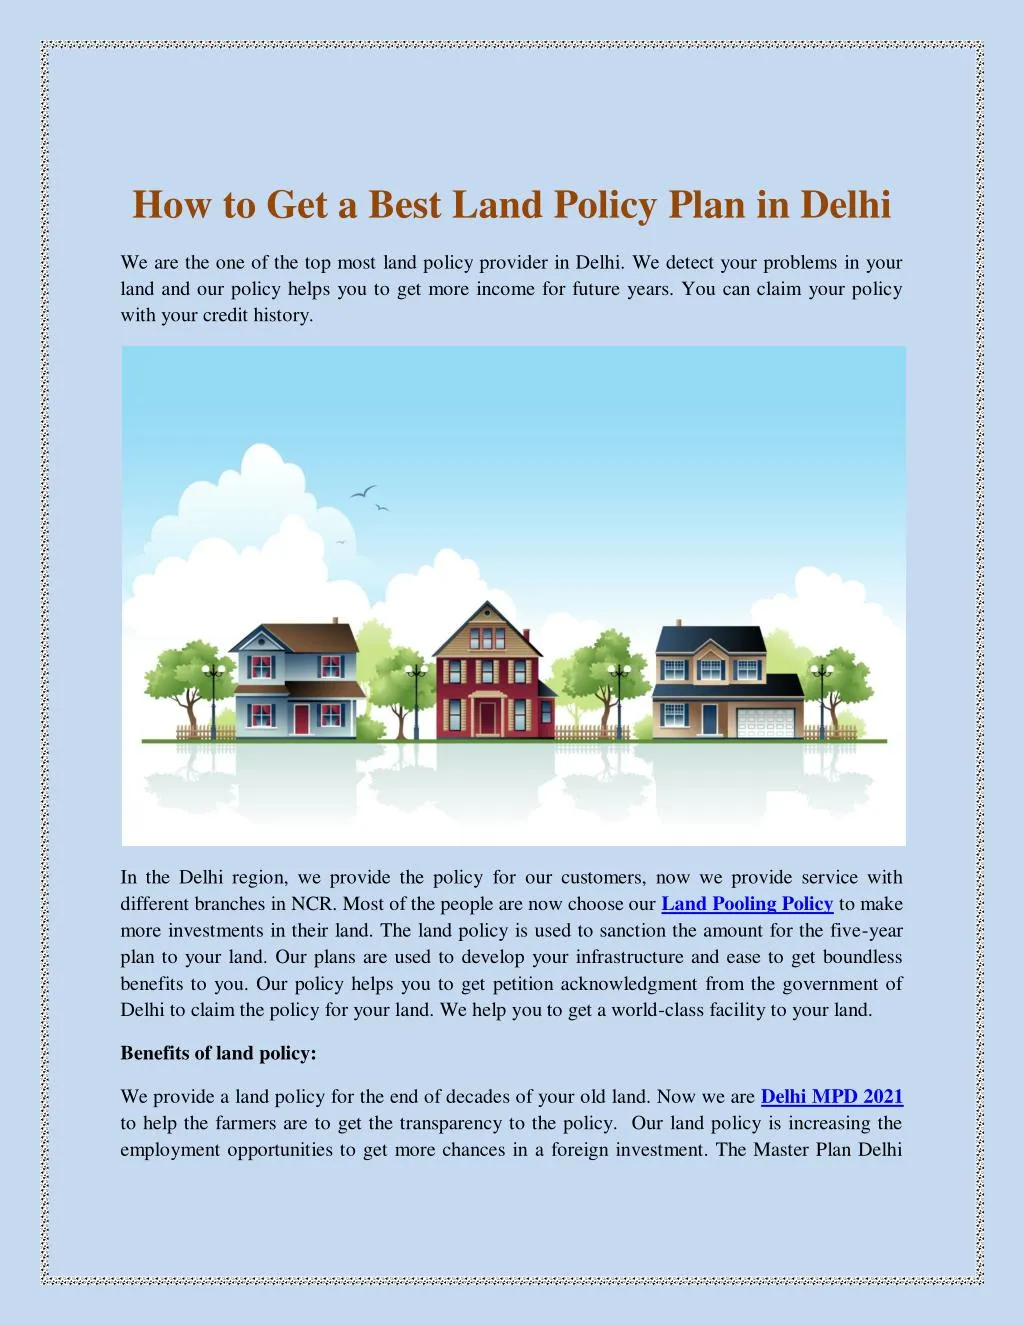 how to get a best land policy plan in delhi